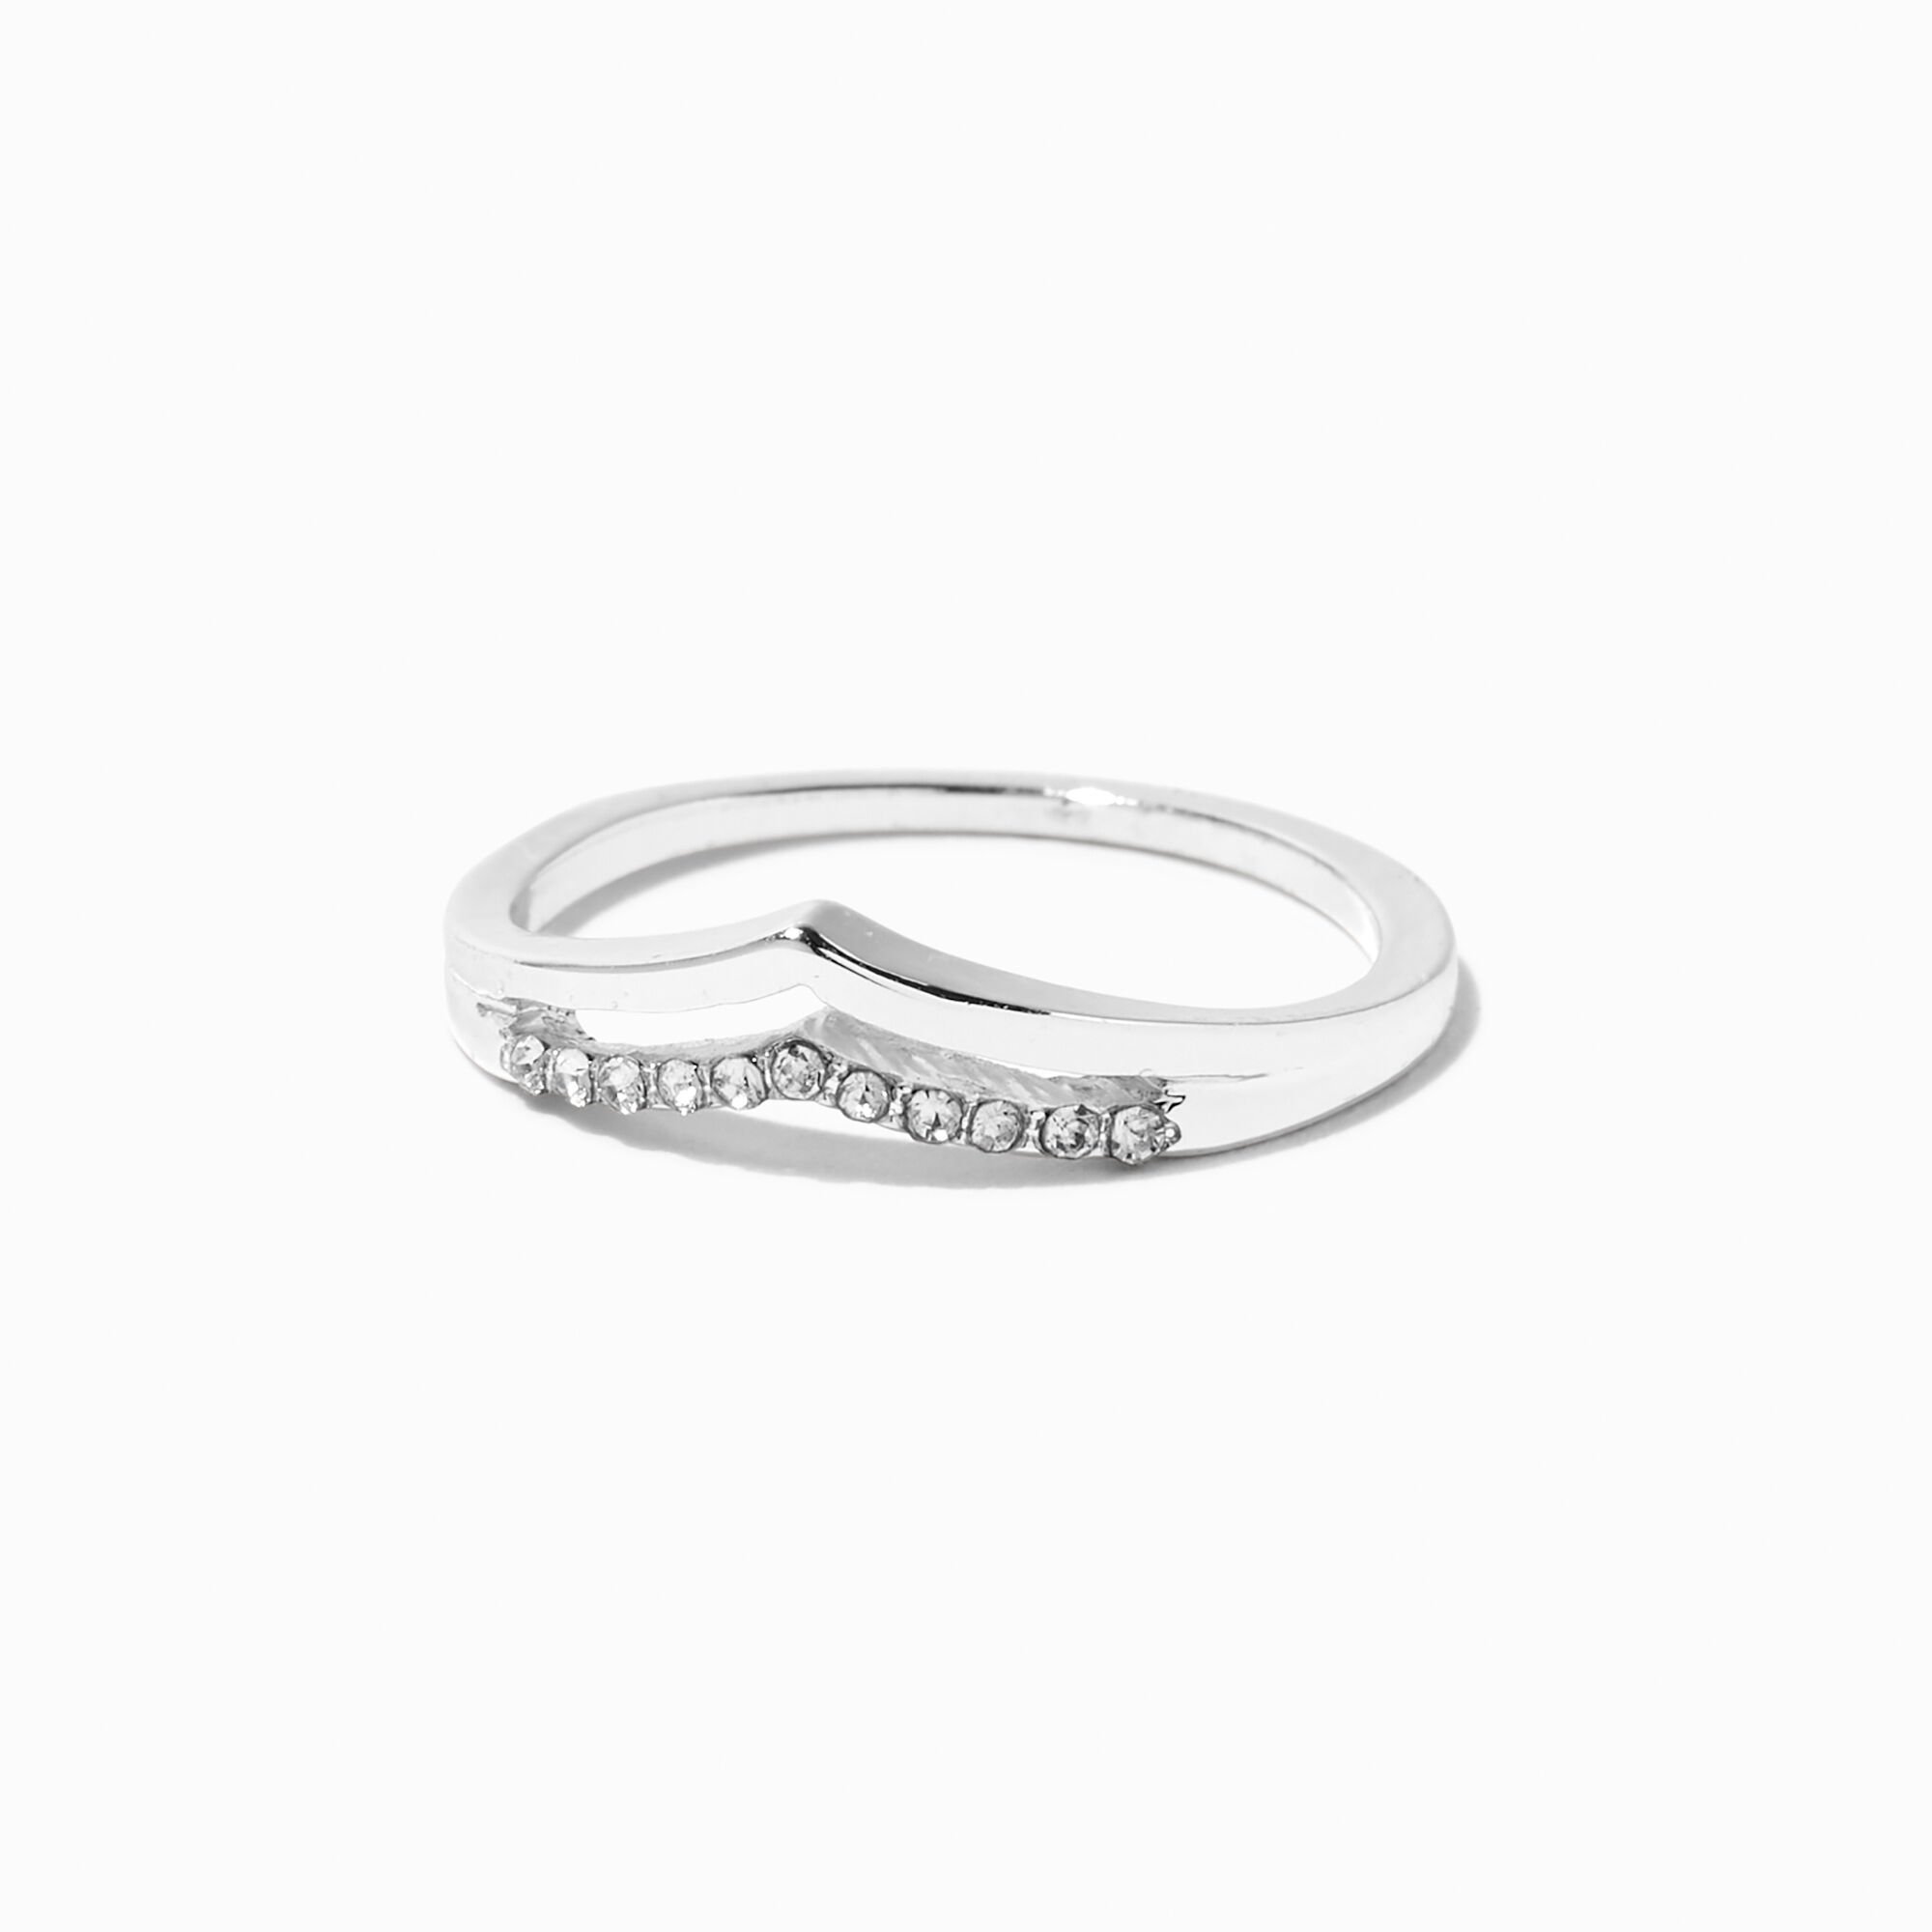 View Claires Crystal Chevron Ring Silver information